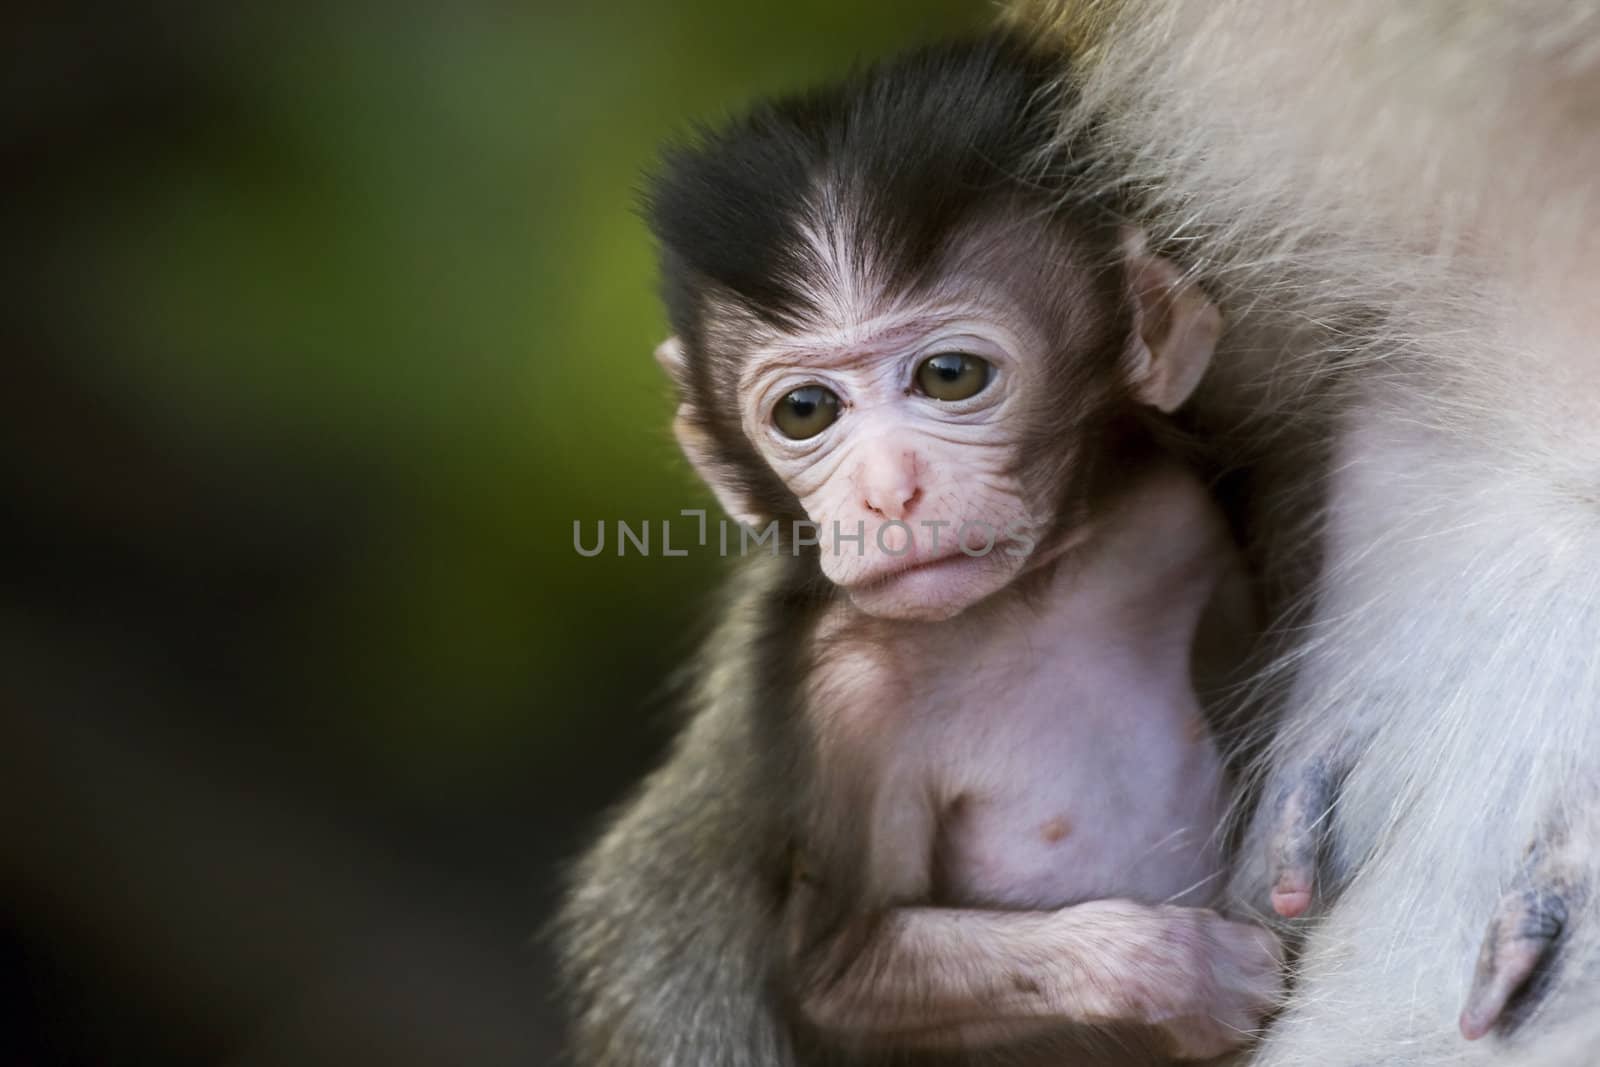 Cute little baby long-tailed macaque held by its mother